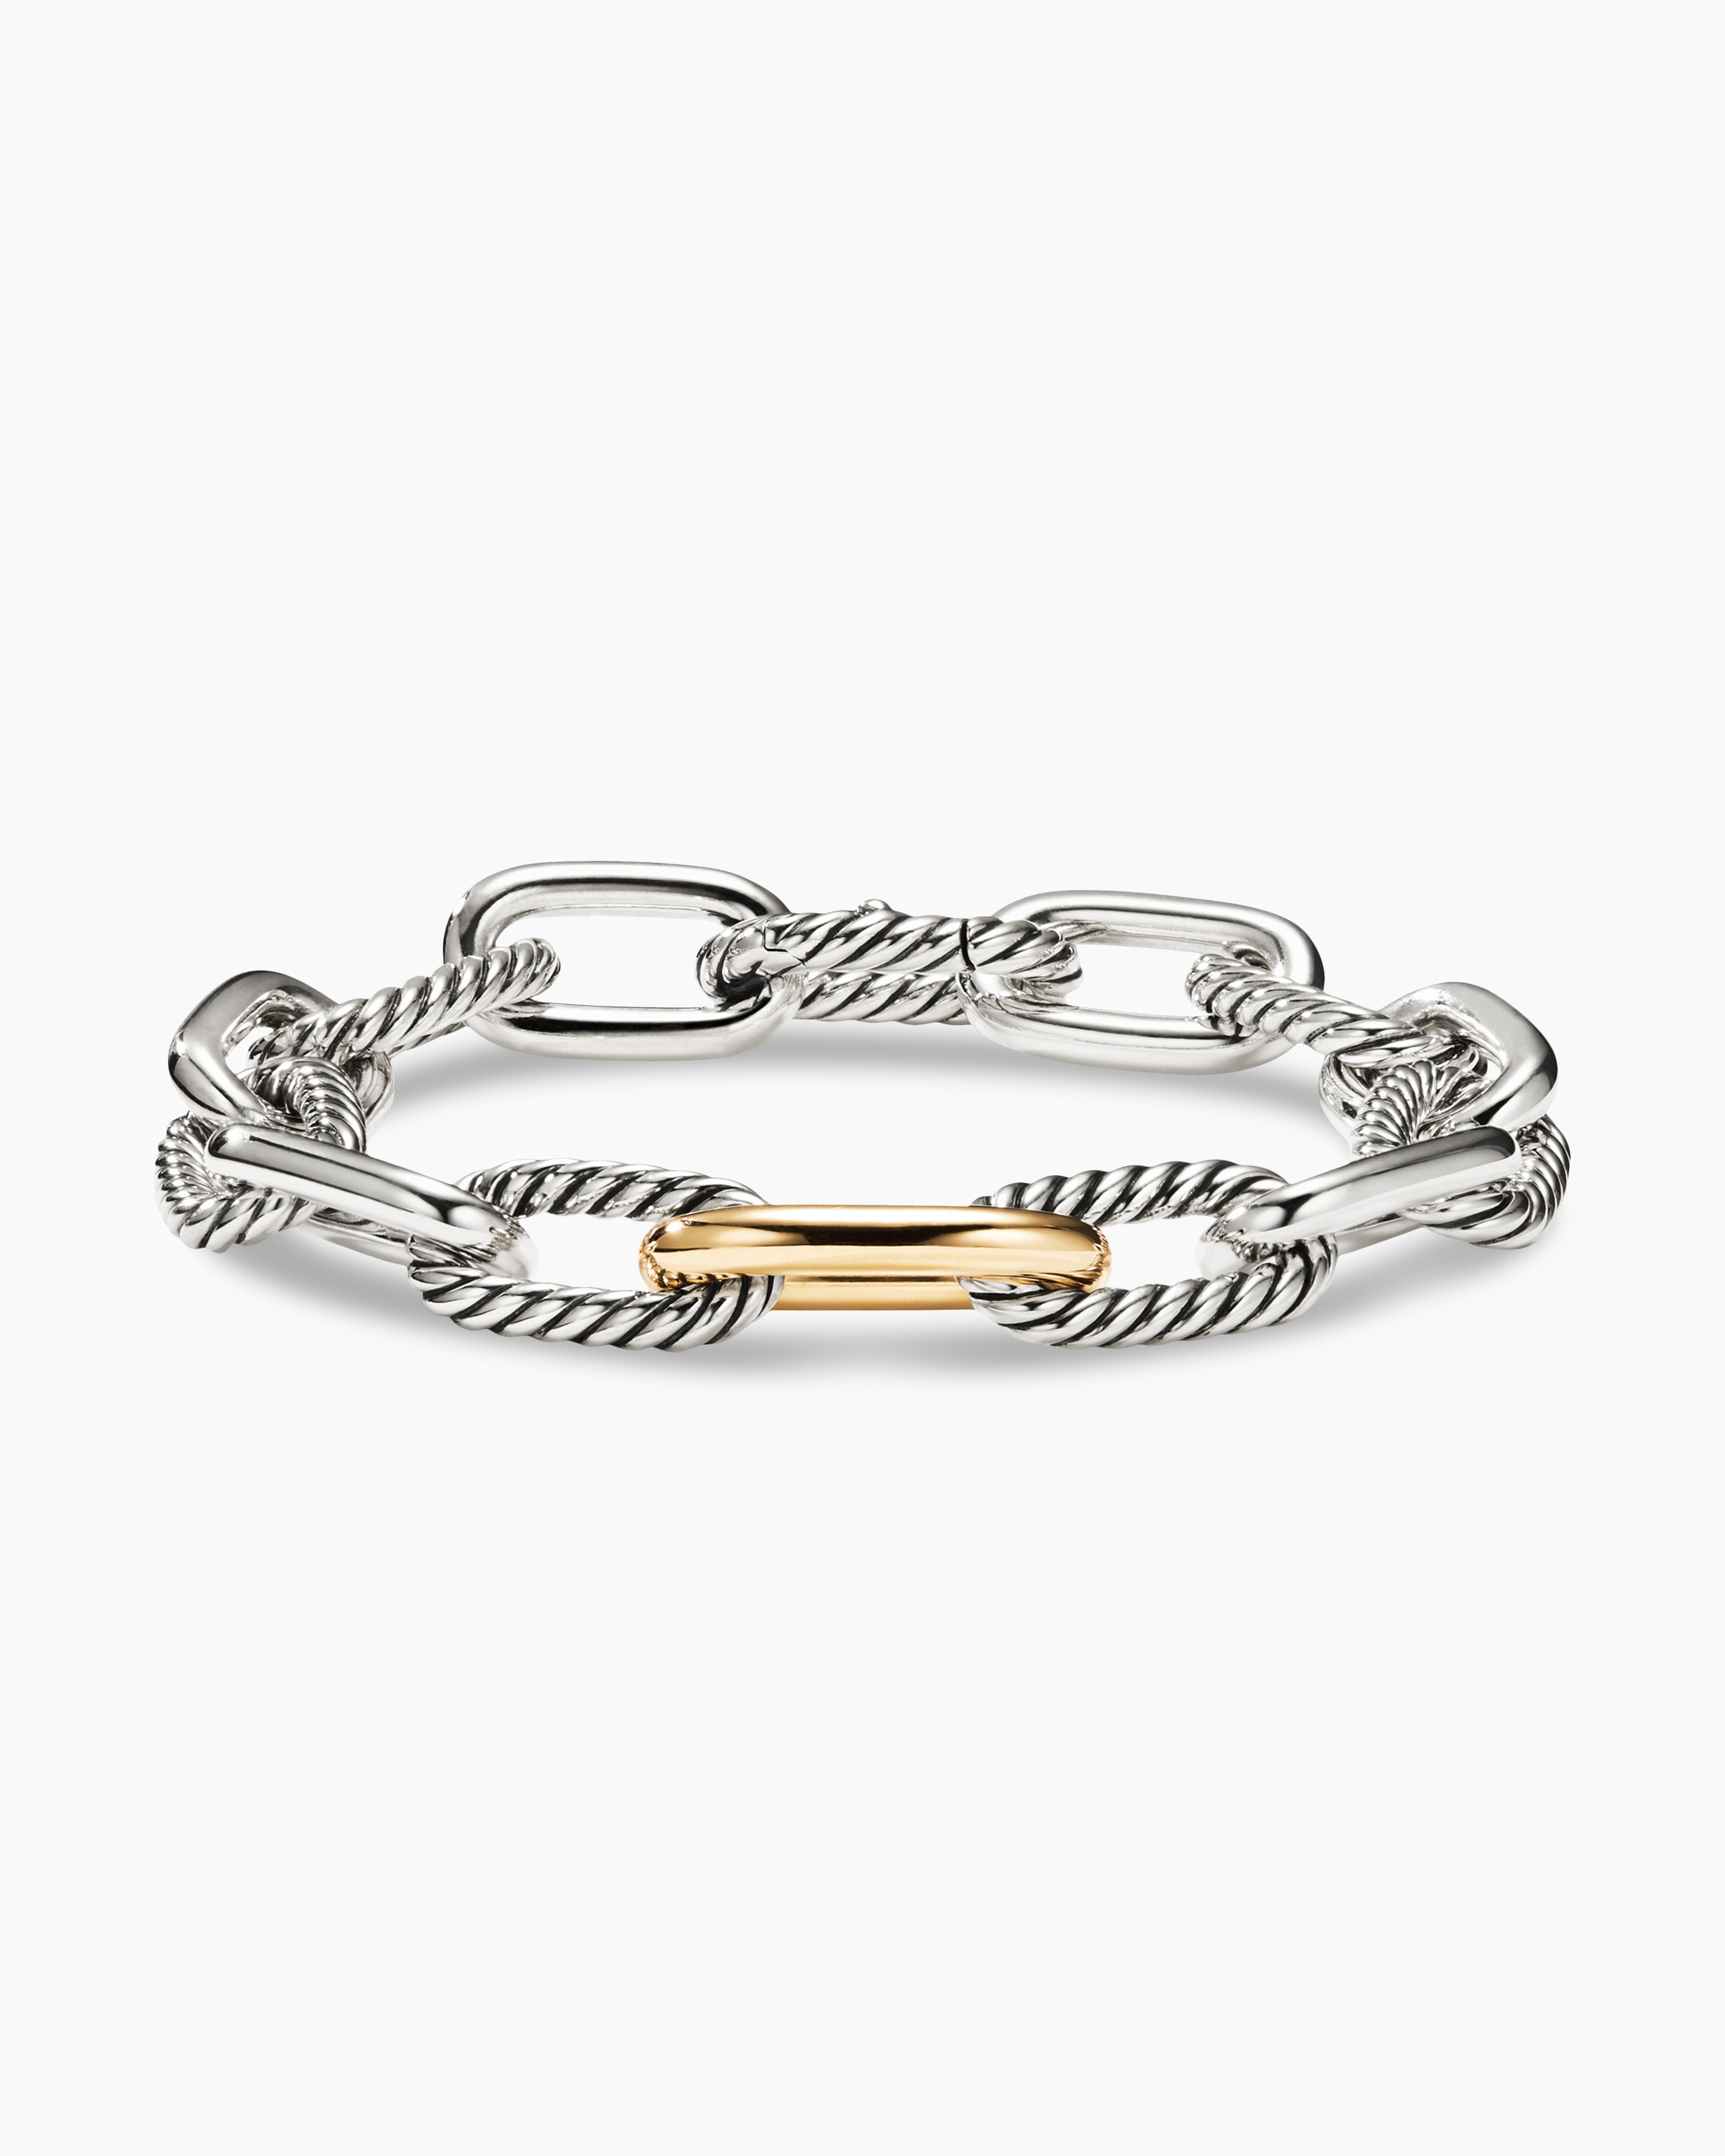 DY Madison® Chain Bracelet in Sterling Silver, 11mm